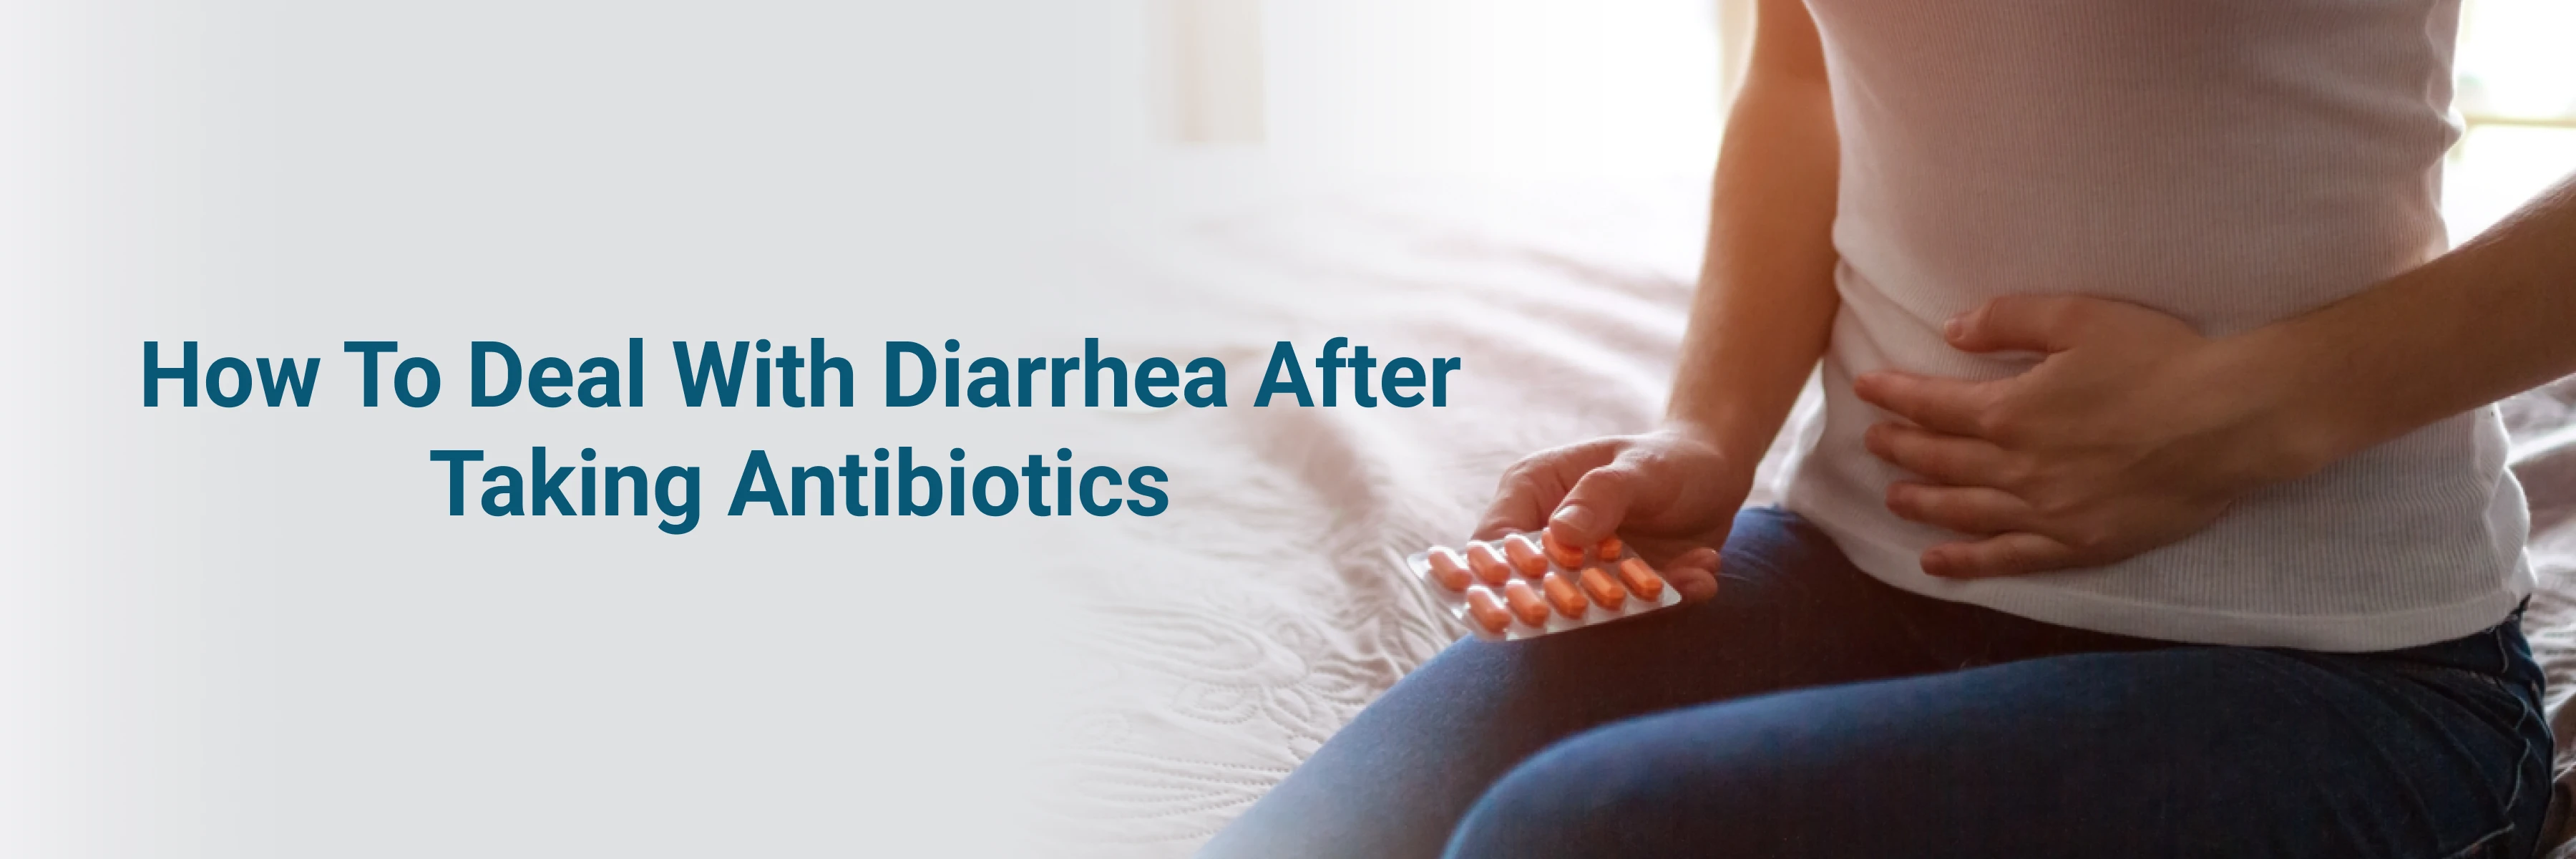 How To Deal With Diarrhea After Taking Antibiotics?